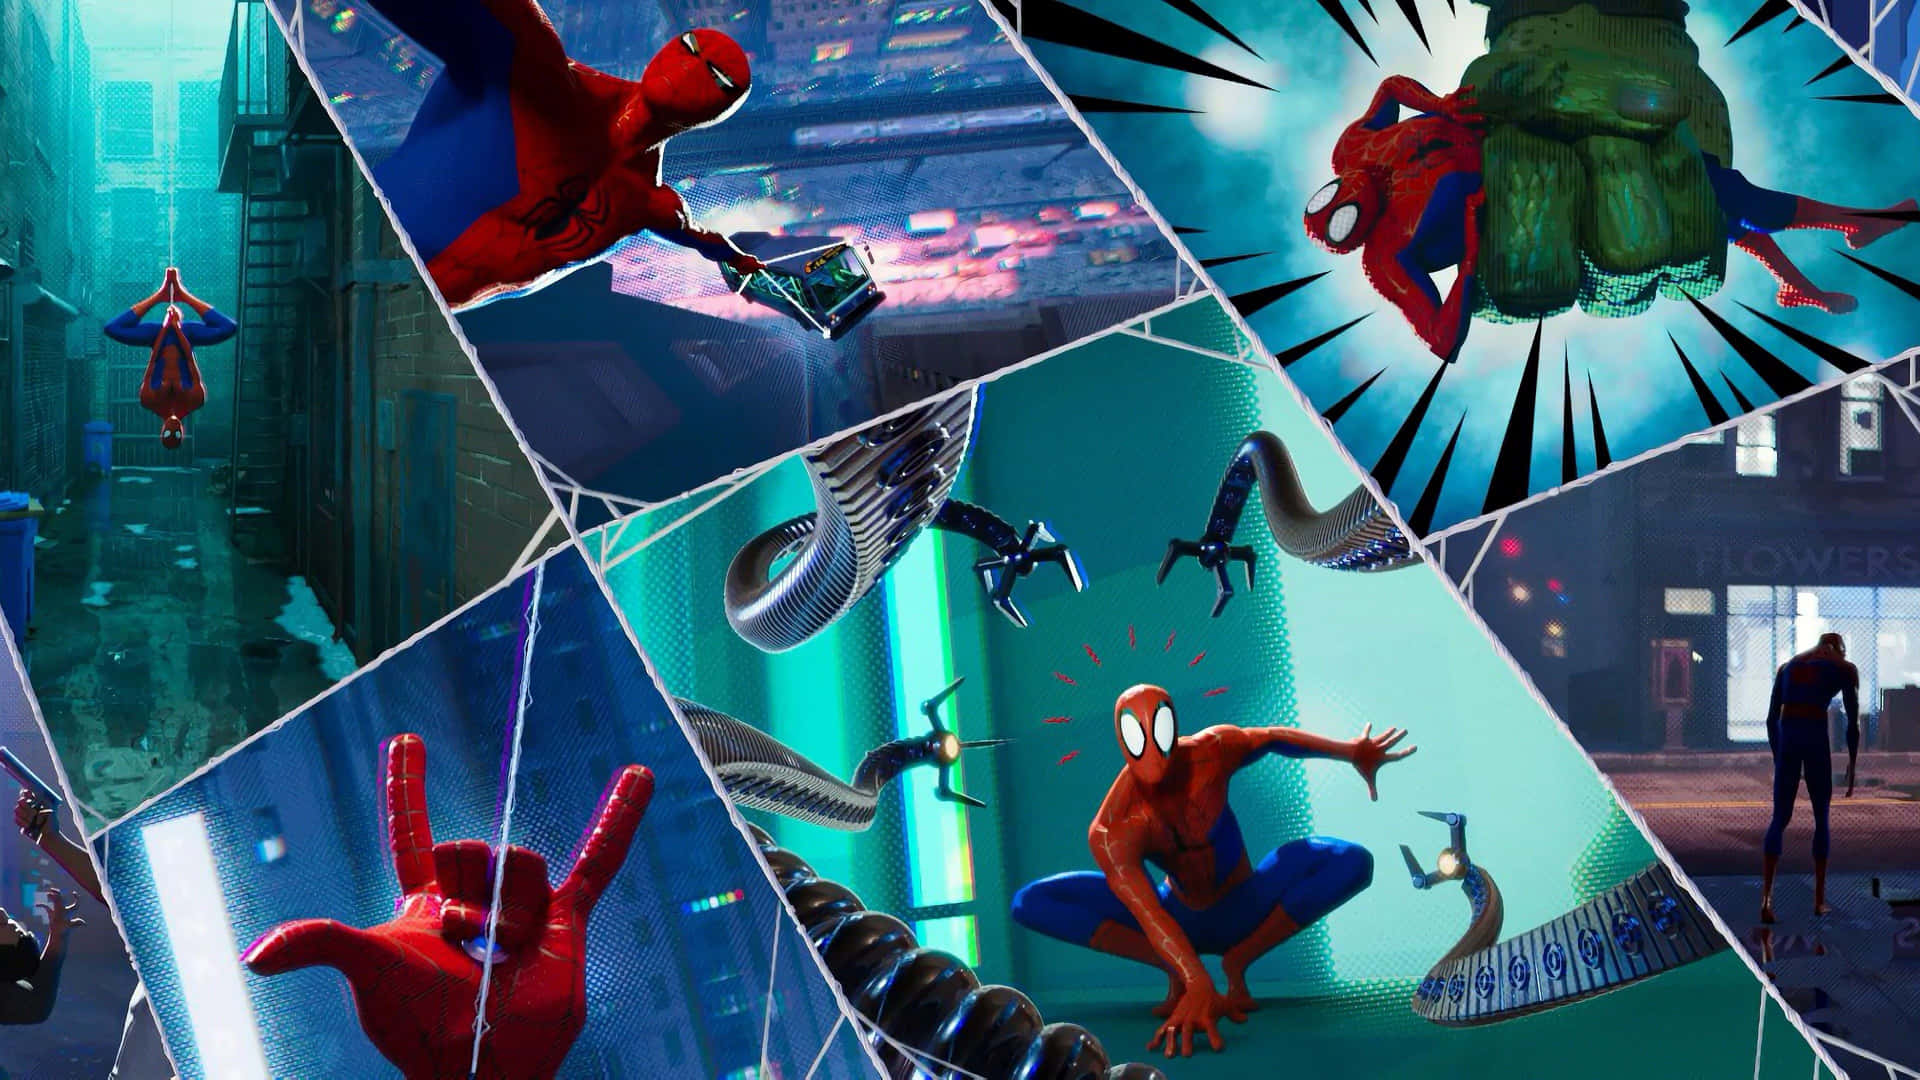 Explore the thrilling multiverse with Spider Man in Spider-Man: Into the Spider-Verse 4K. Wallpaper